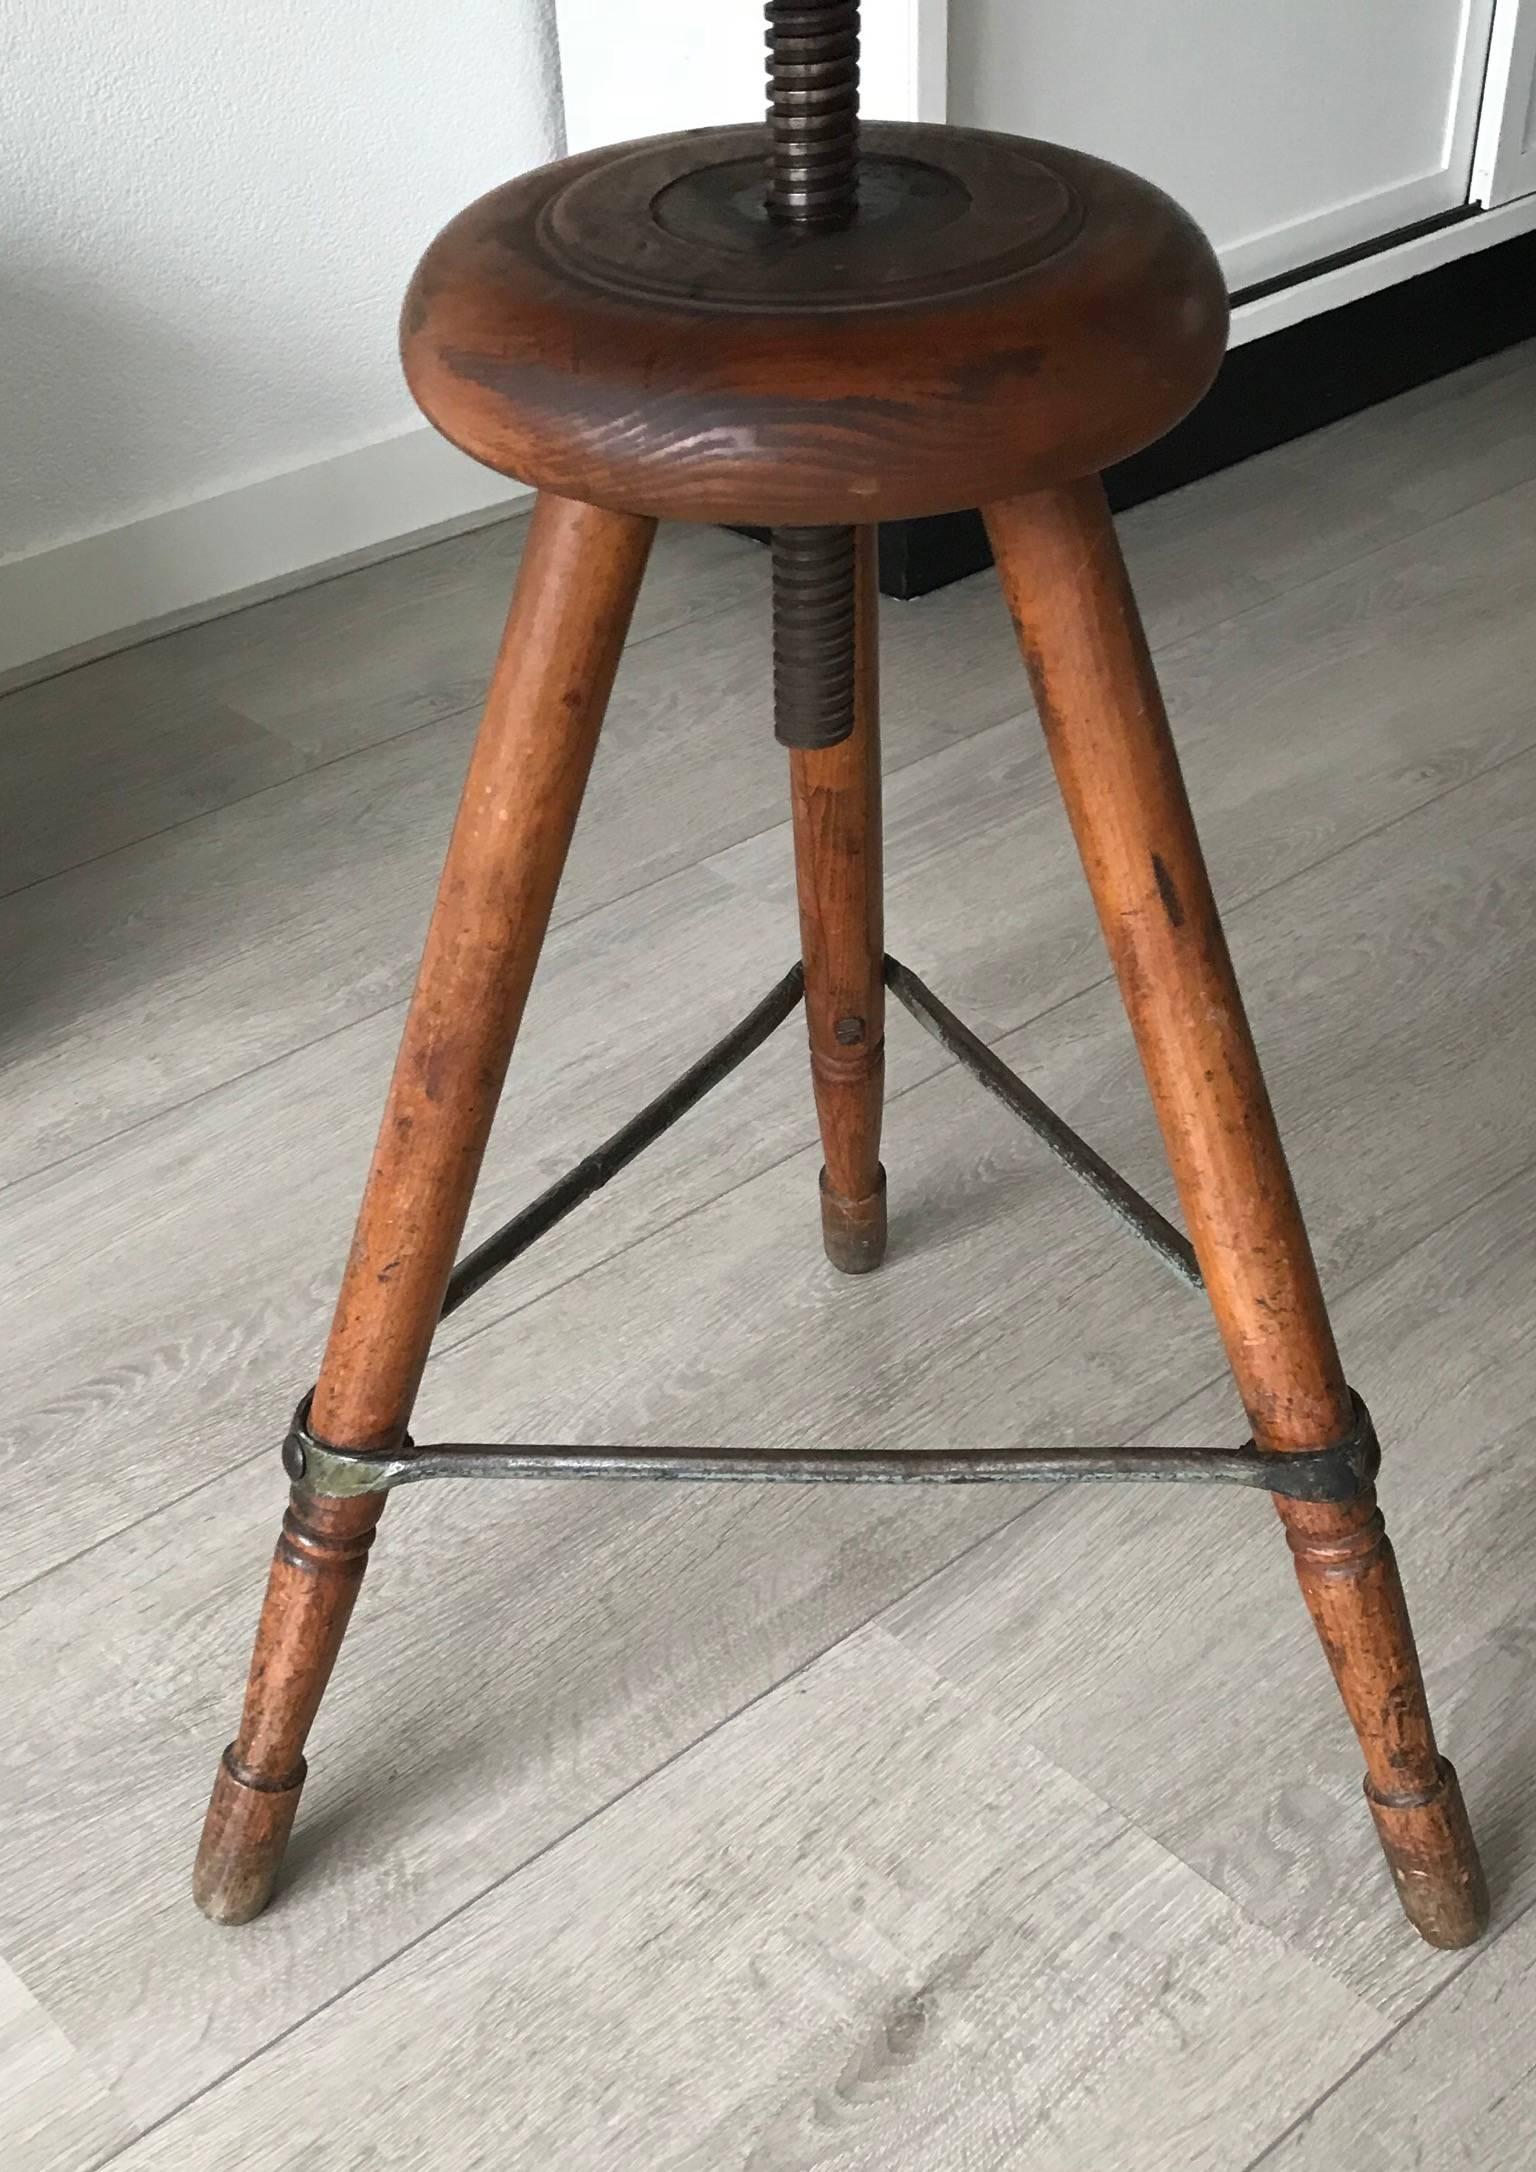 Rare Industrial Artist Studio Spindle Chair or Stool Adjustable in Height, 1920s 5